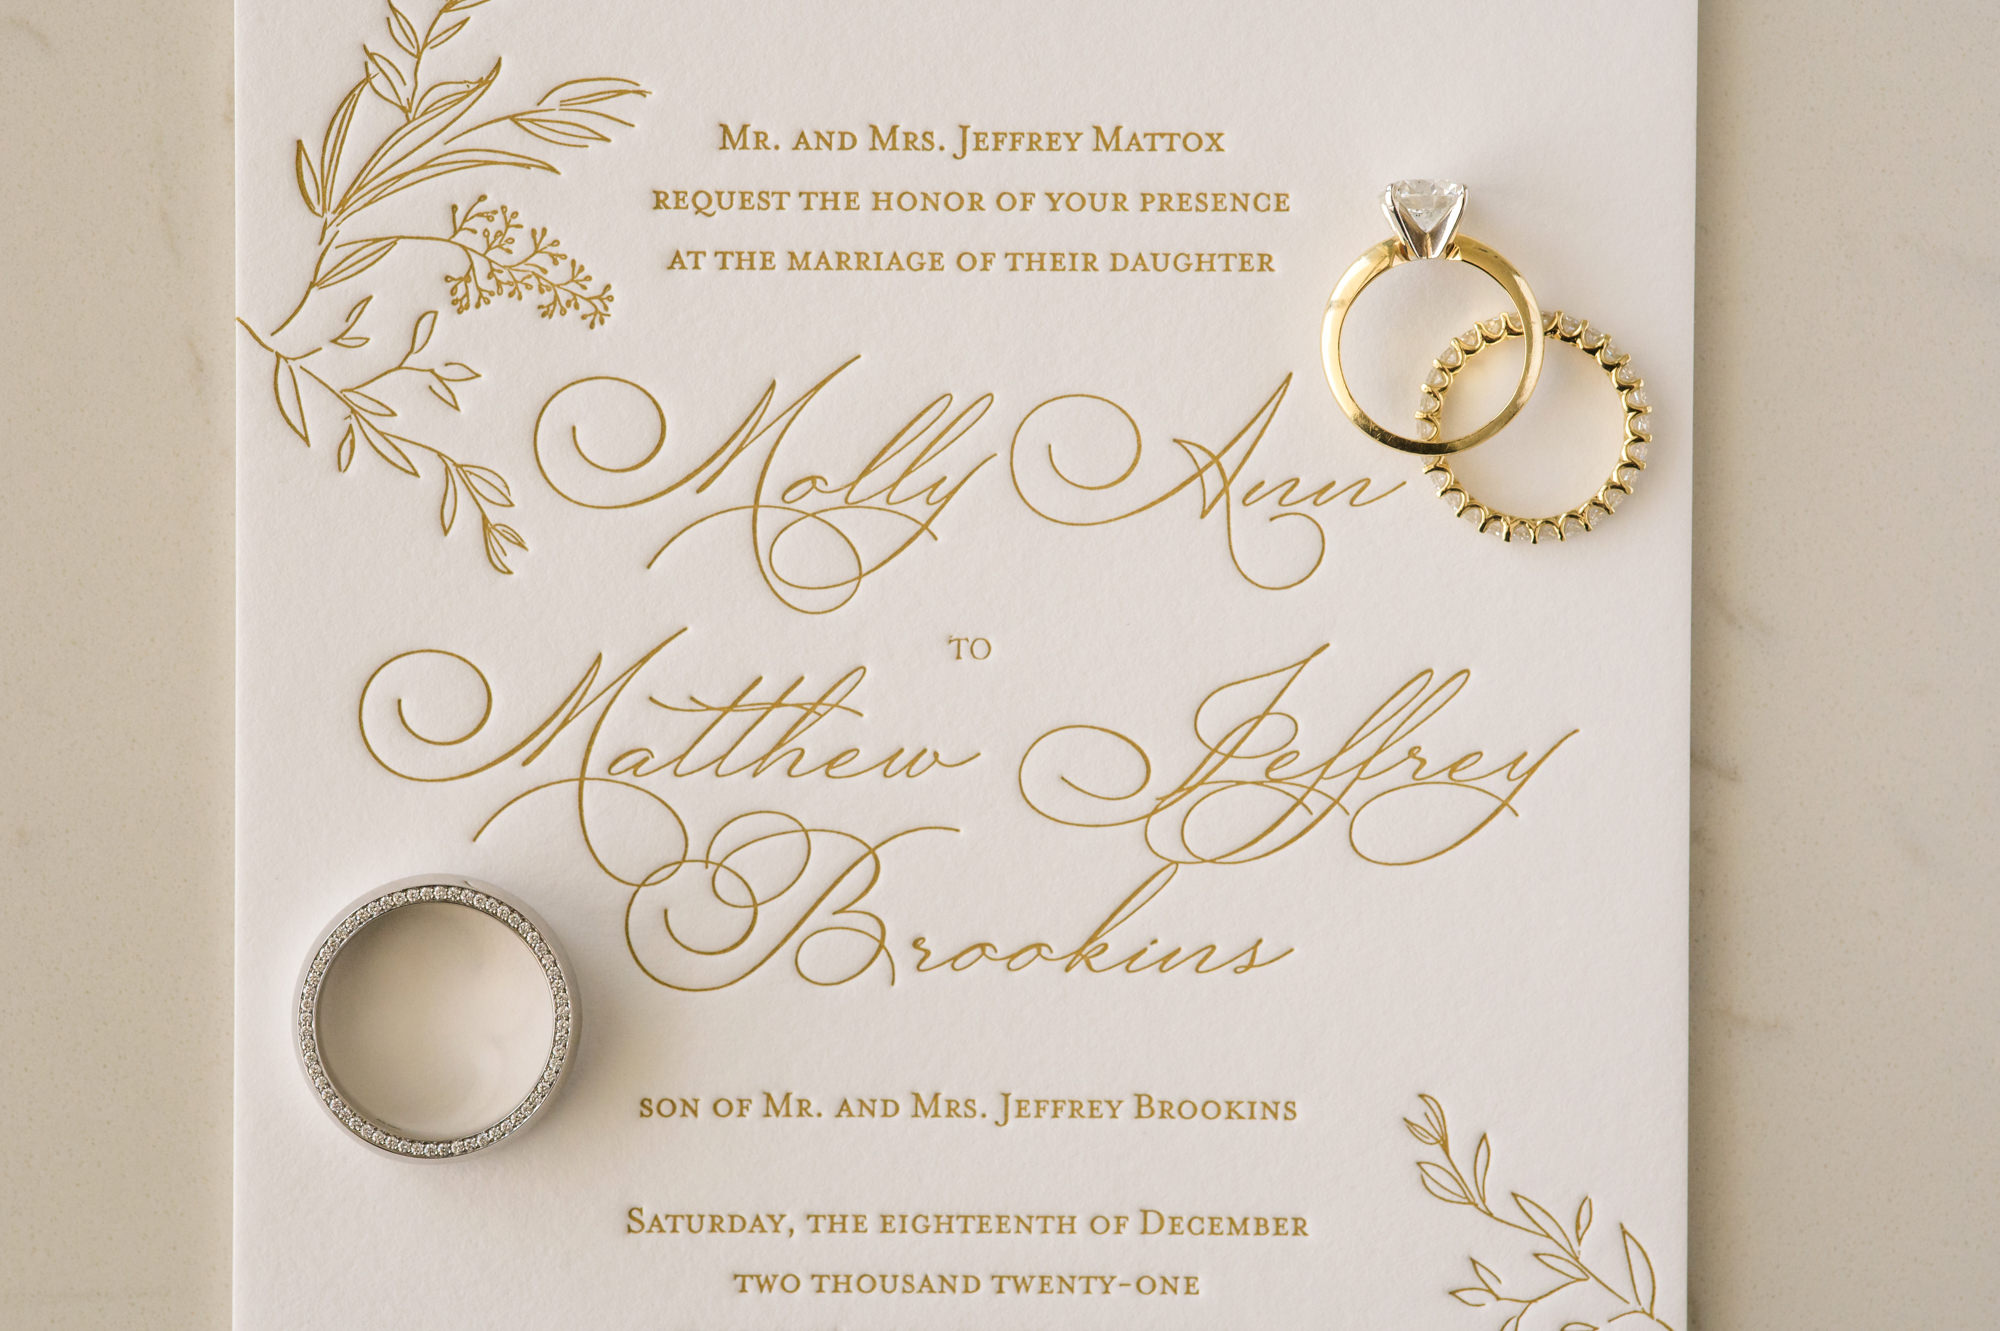 Classic Letter Pressed Gold and Ivory Wedding Invitation Ideas | Tampa Bay Stationery A&P Designs